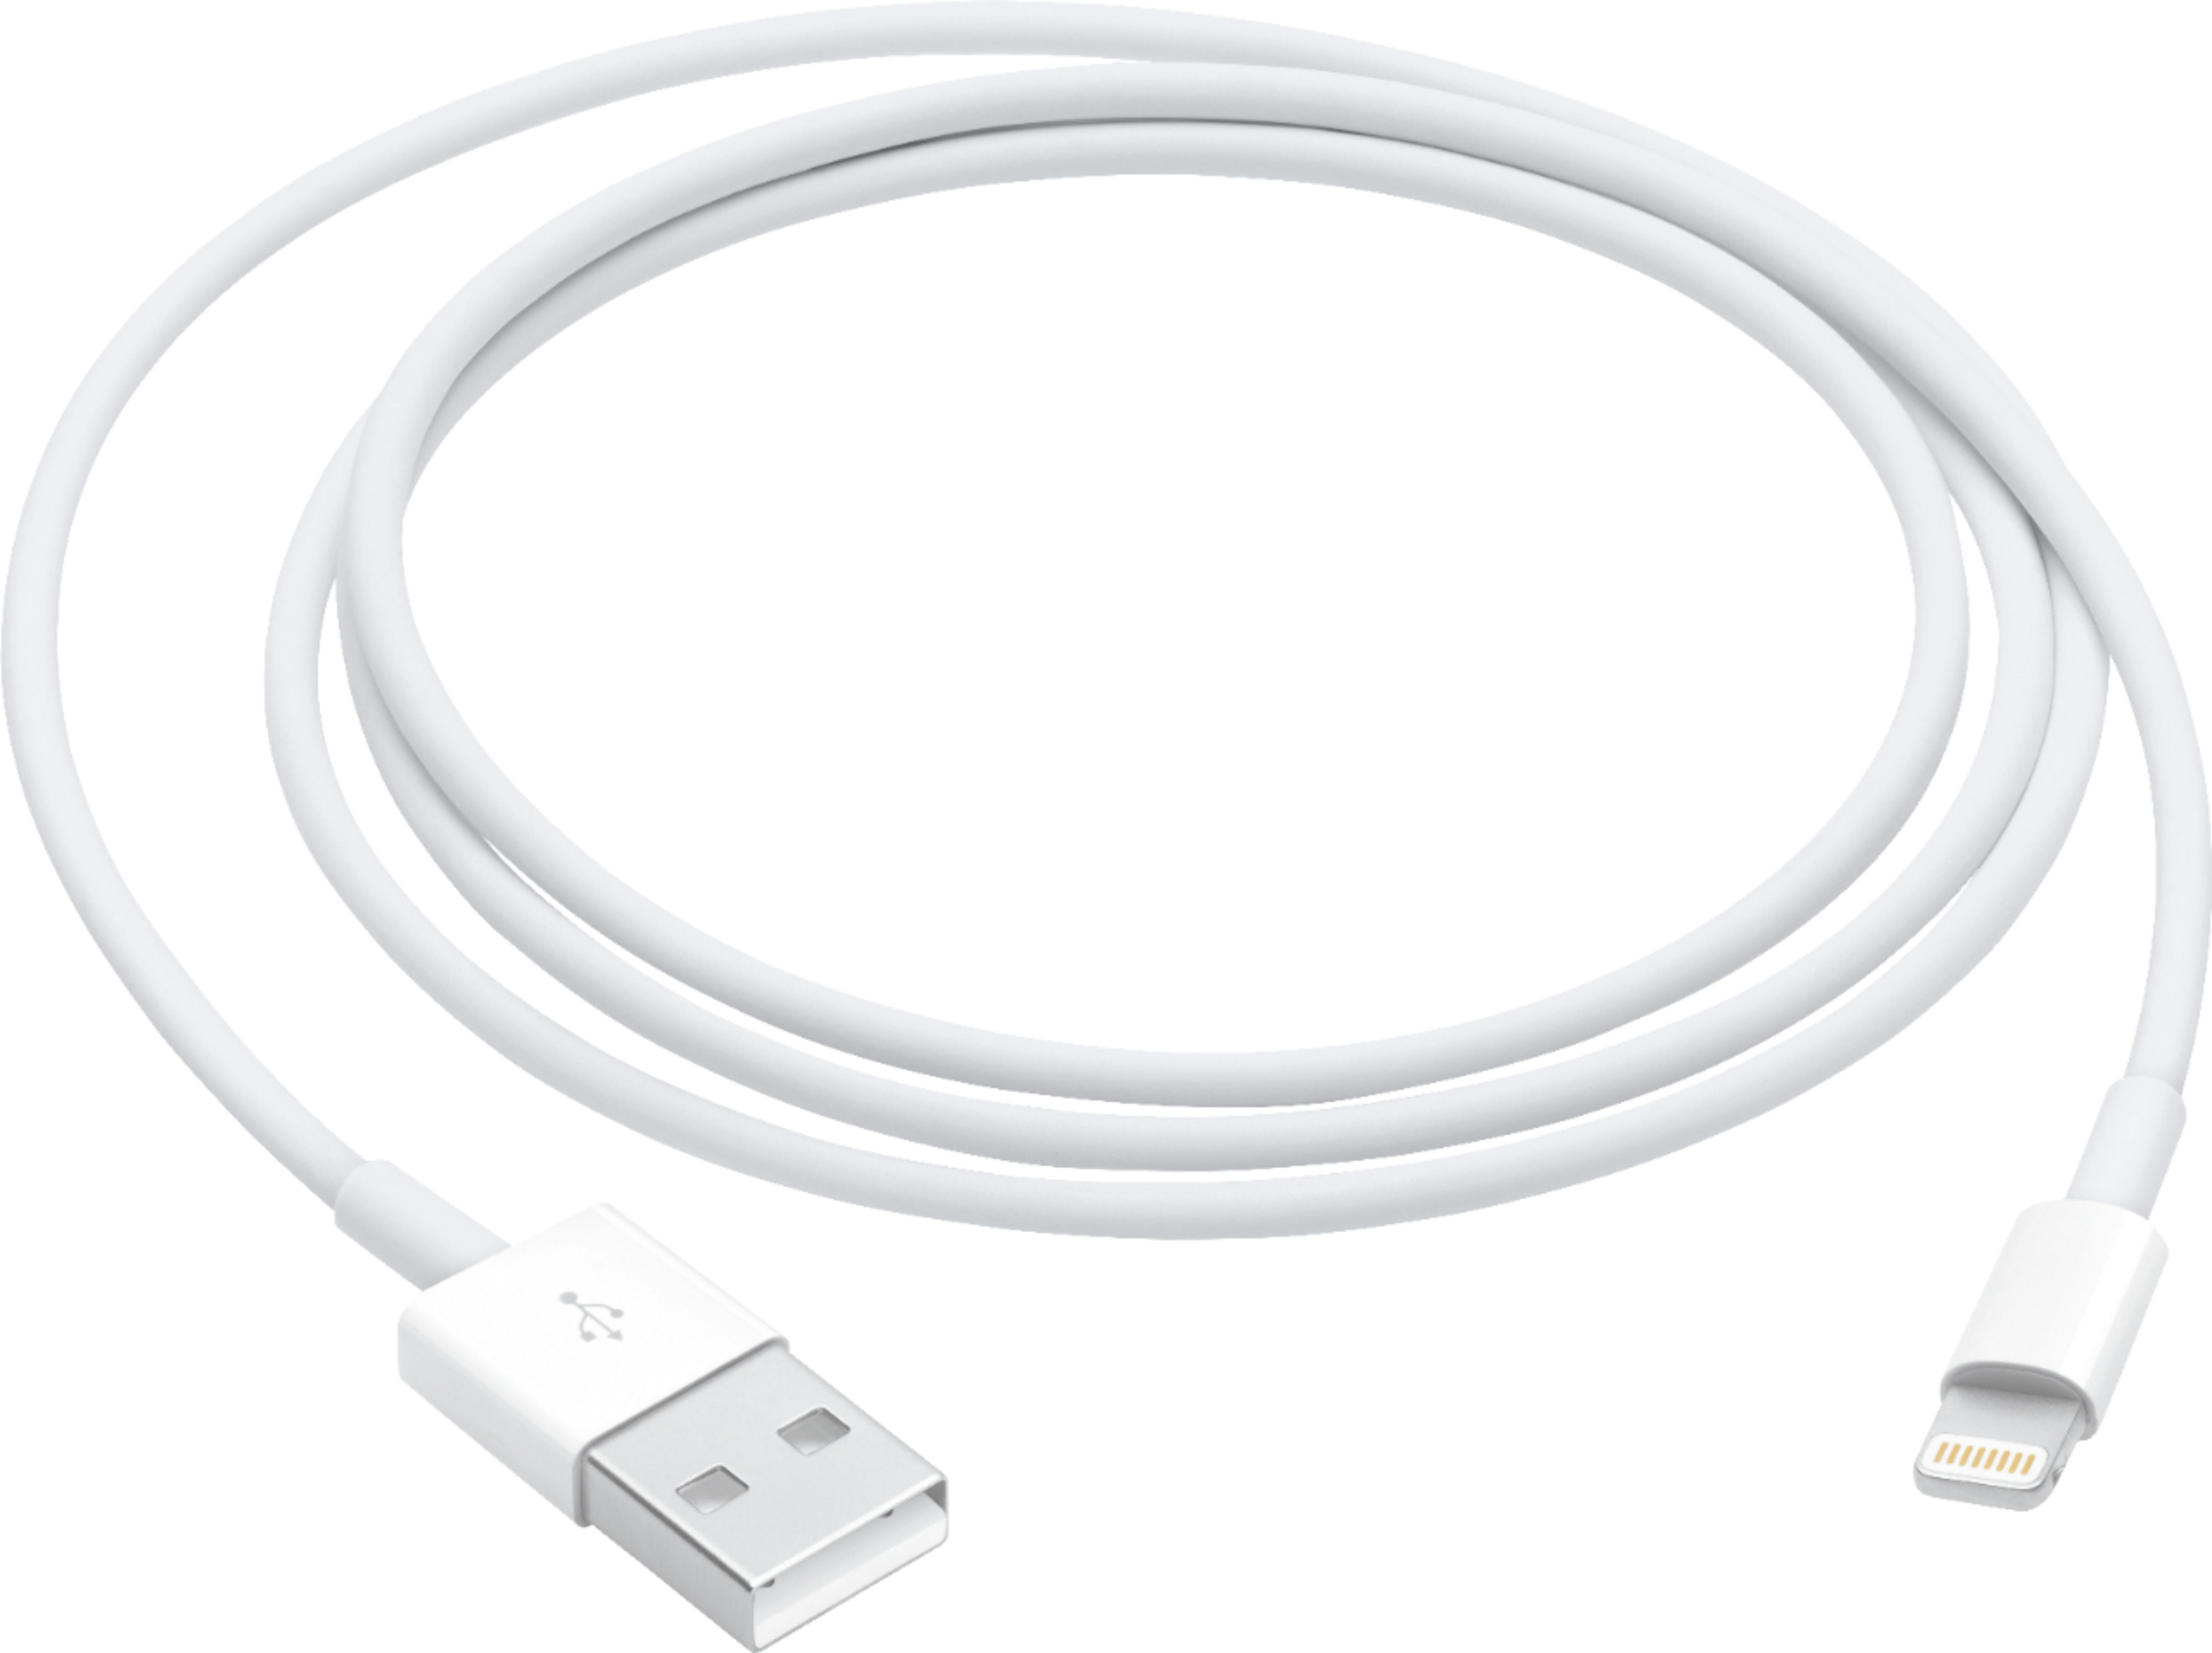 Questions and Answers: Apple 3.3' Lightning to USB Cable White MQUE2AM ...